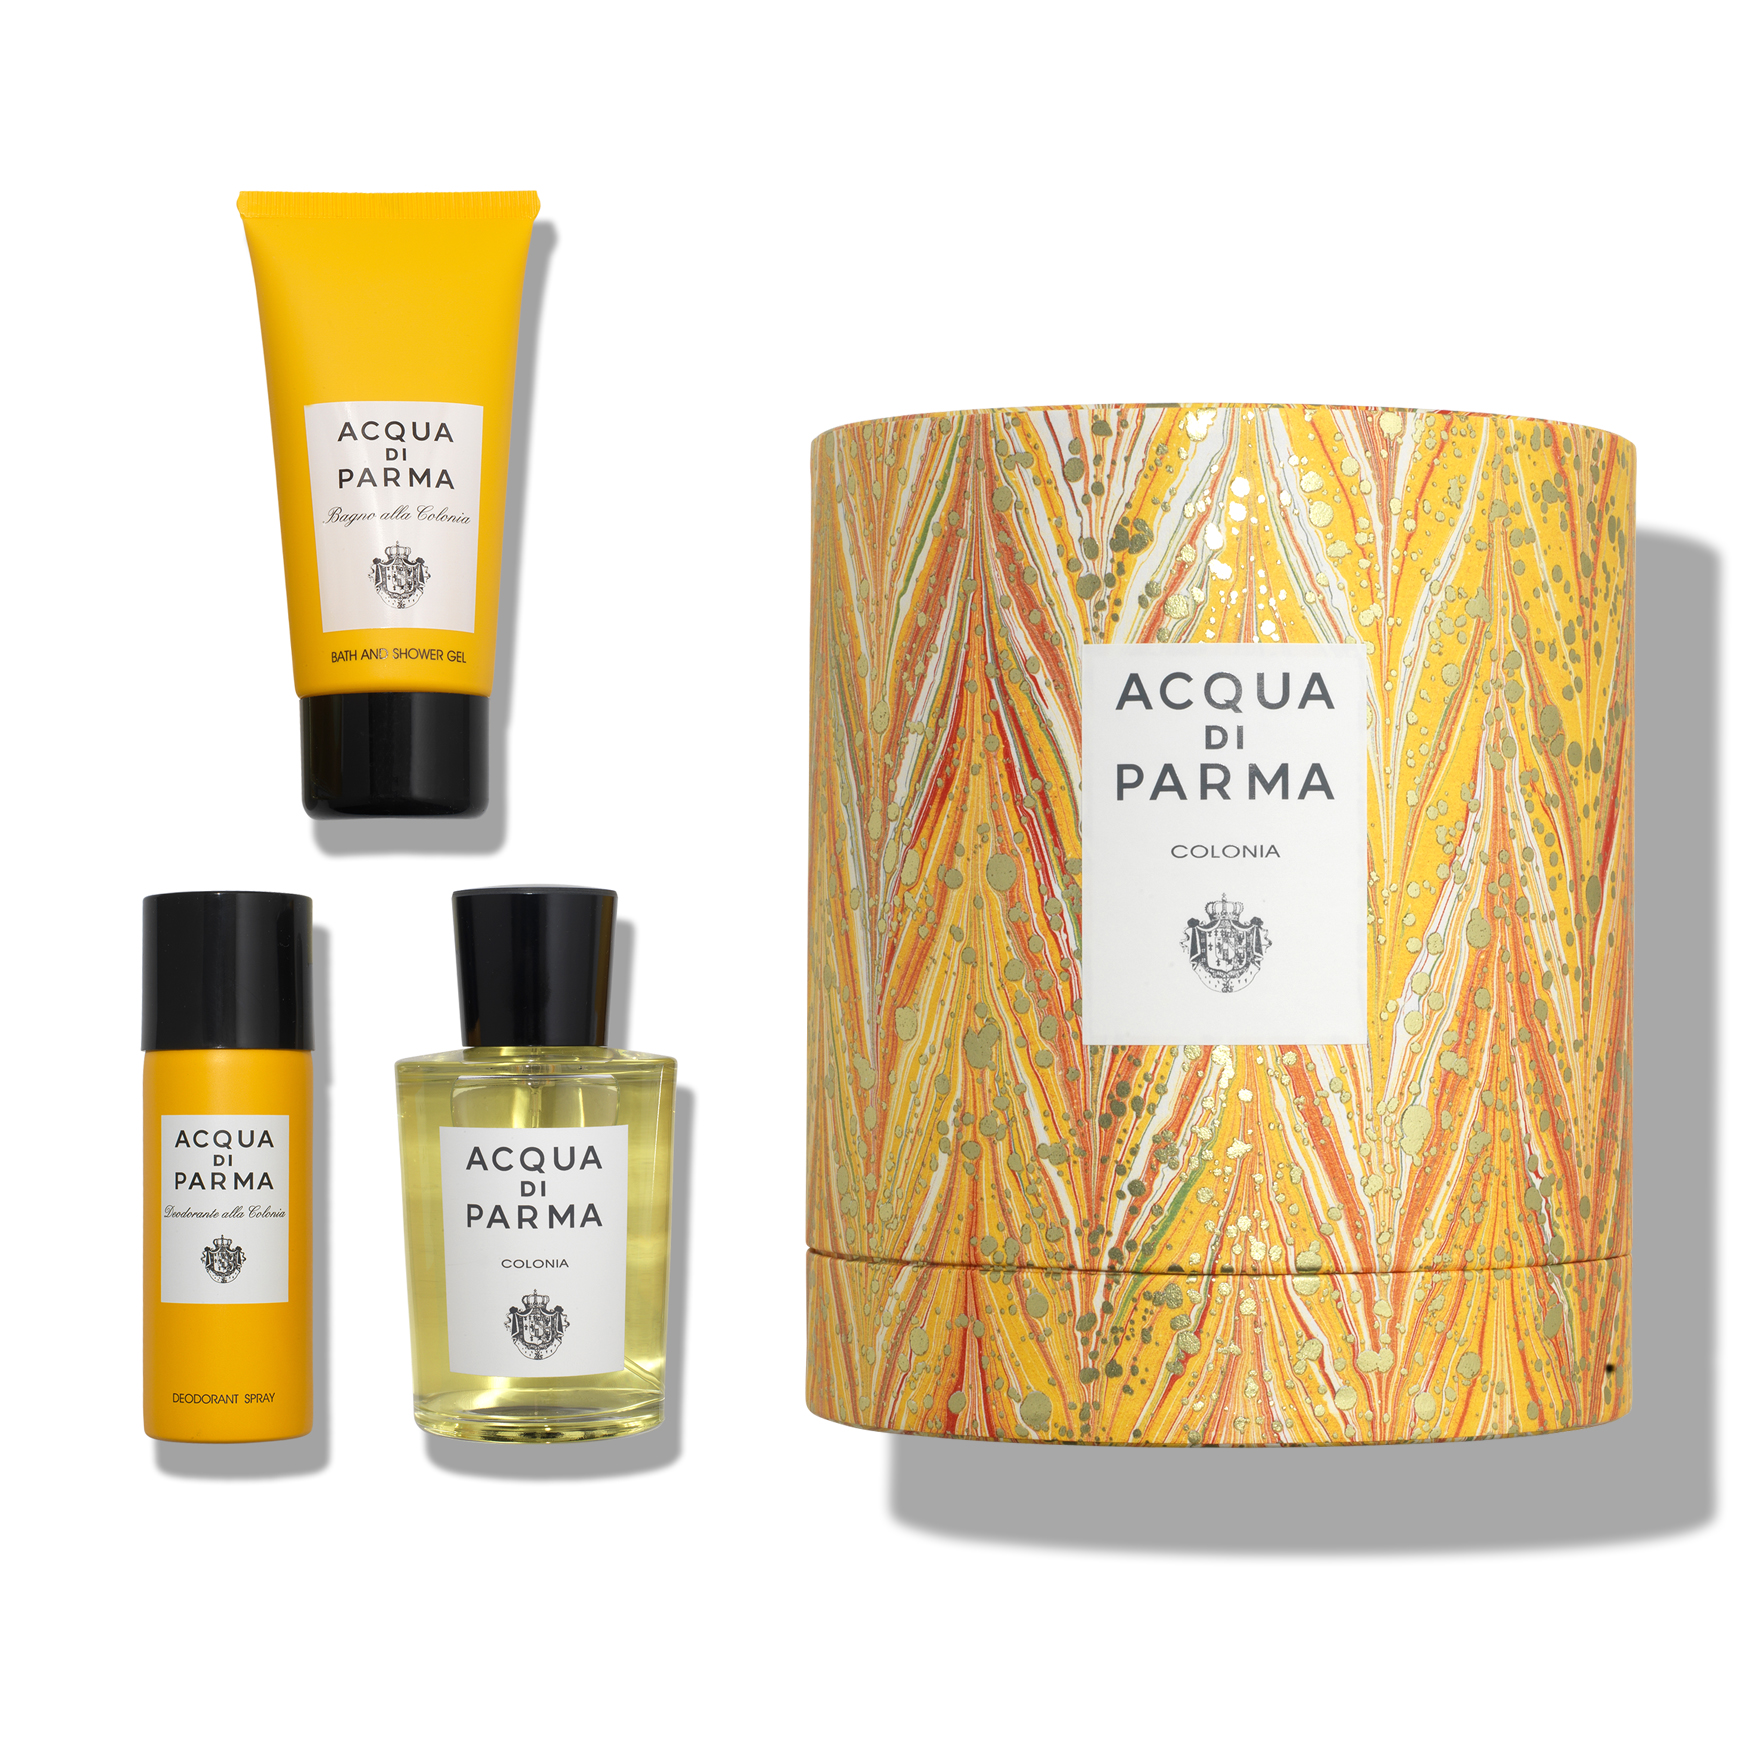 5 Of The Best Acqua di Parma Fragrances Of All Time